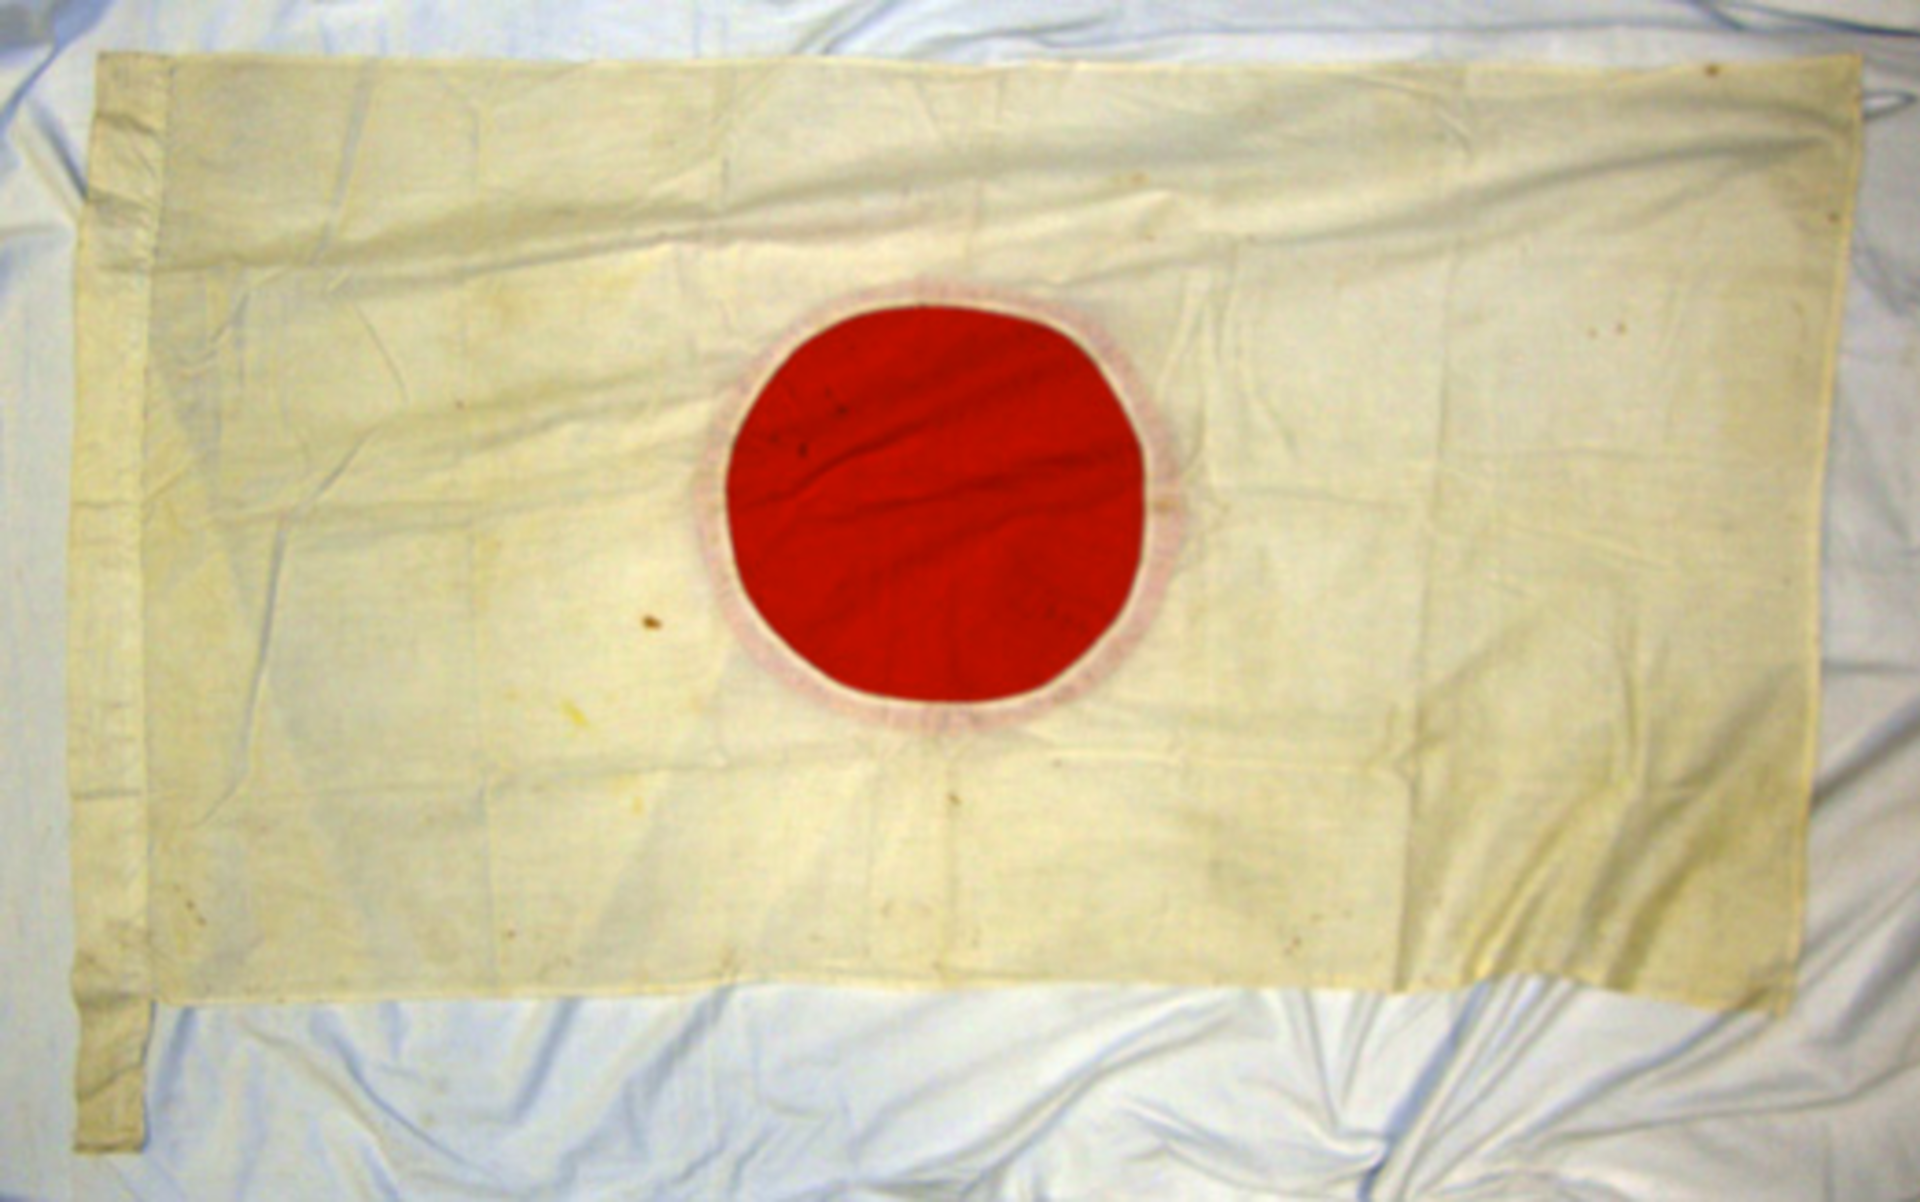 Captured, WW2 Japanese Battle Flag / Ensign Of The Empire of Japan